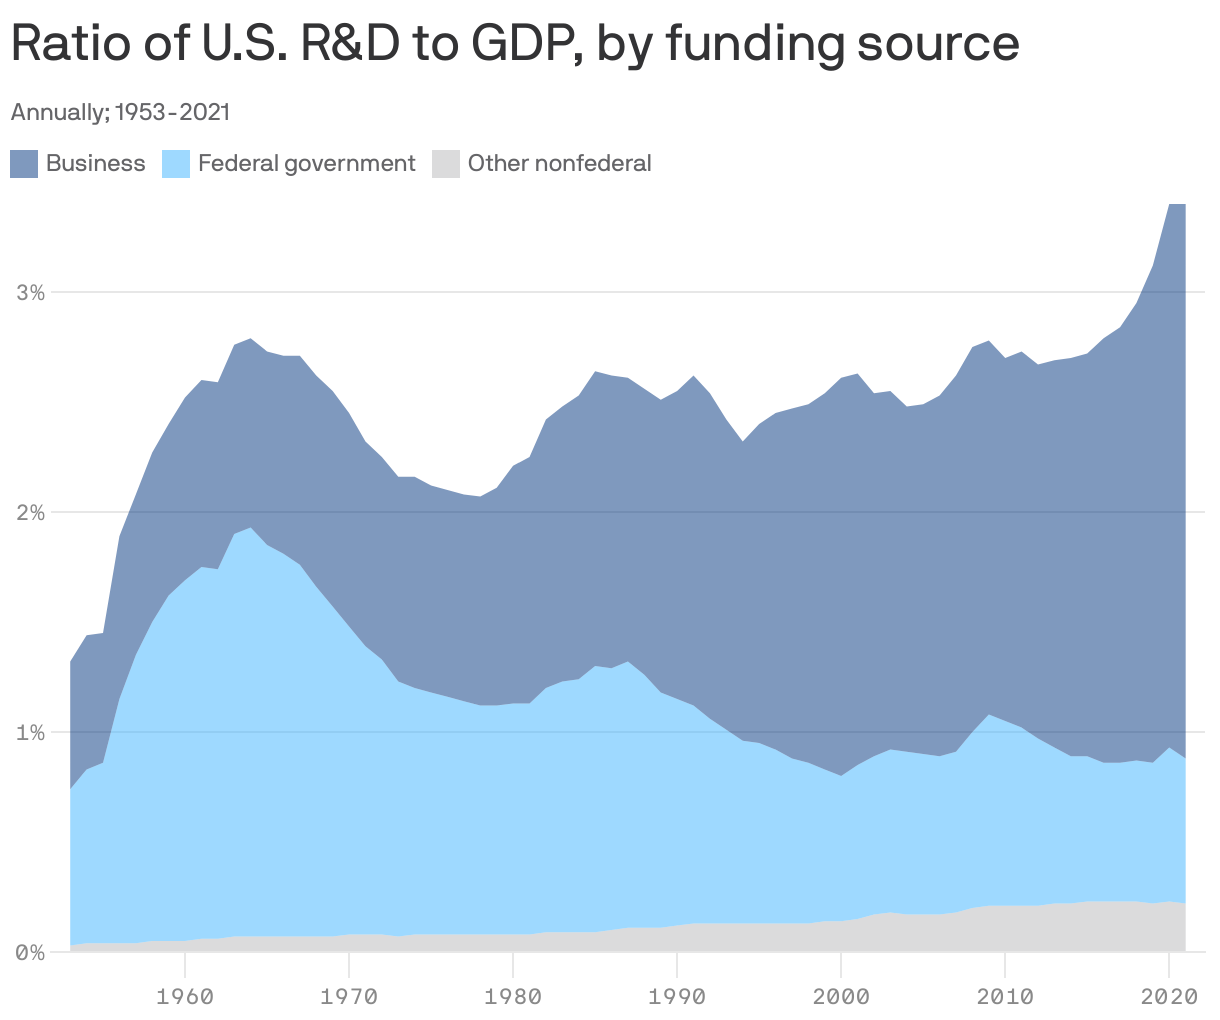 Ratio of U.S. R&D to GDP, by funding source